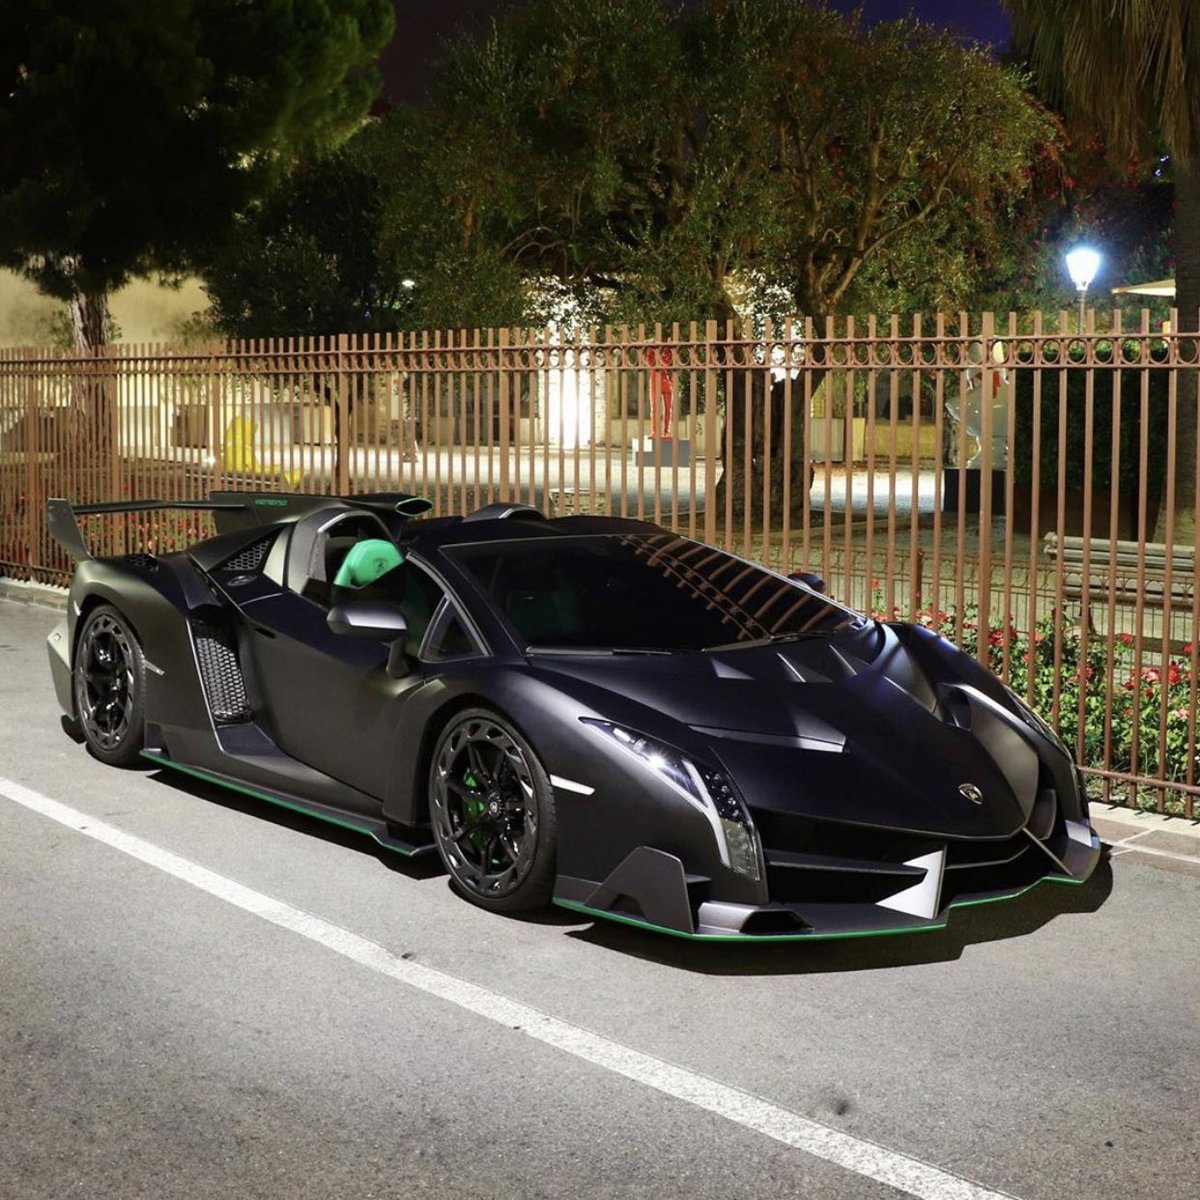 It's painted Nero Nemesis with Verde Ithaca accents. He debuted the car in Monaco along with you a Yellow LaFerrari. Yes he has 2. That interior is nuts by the way